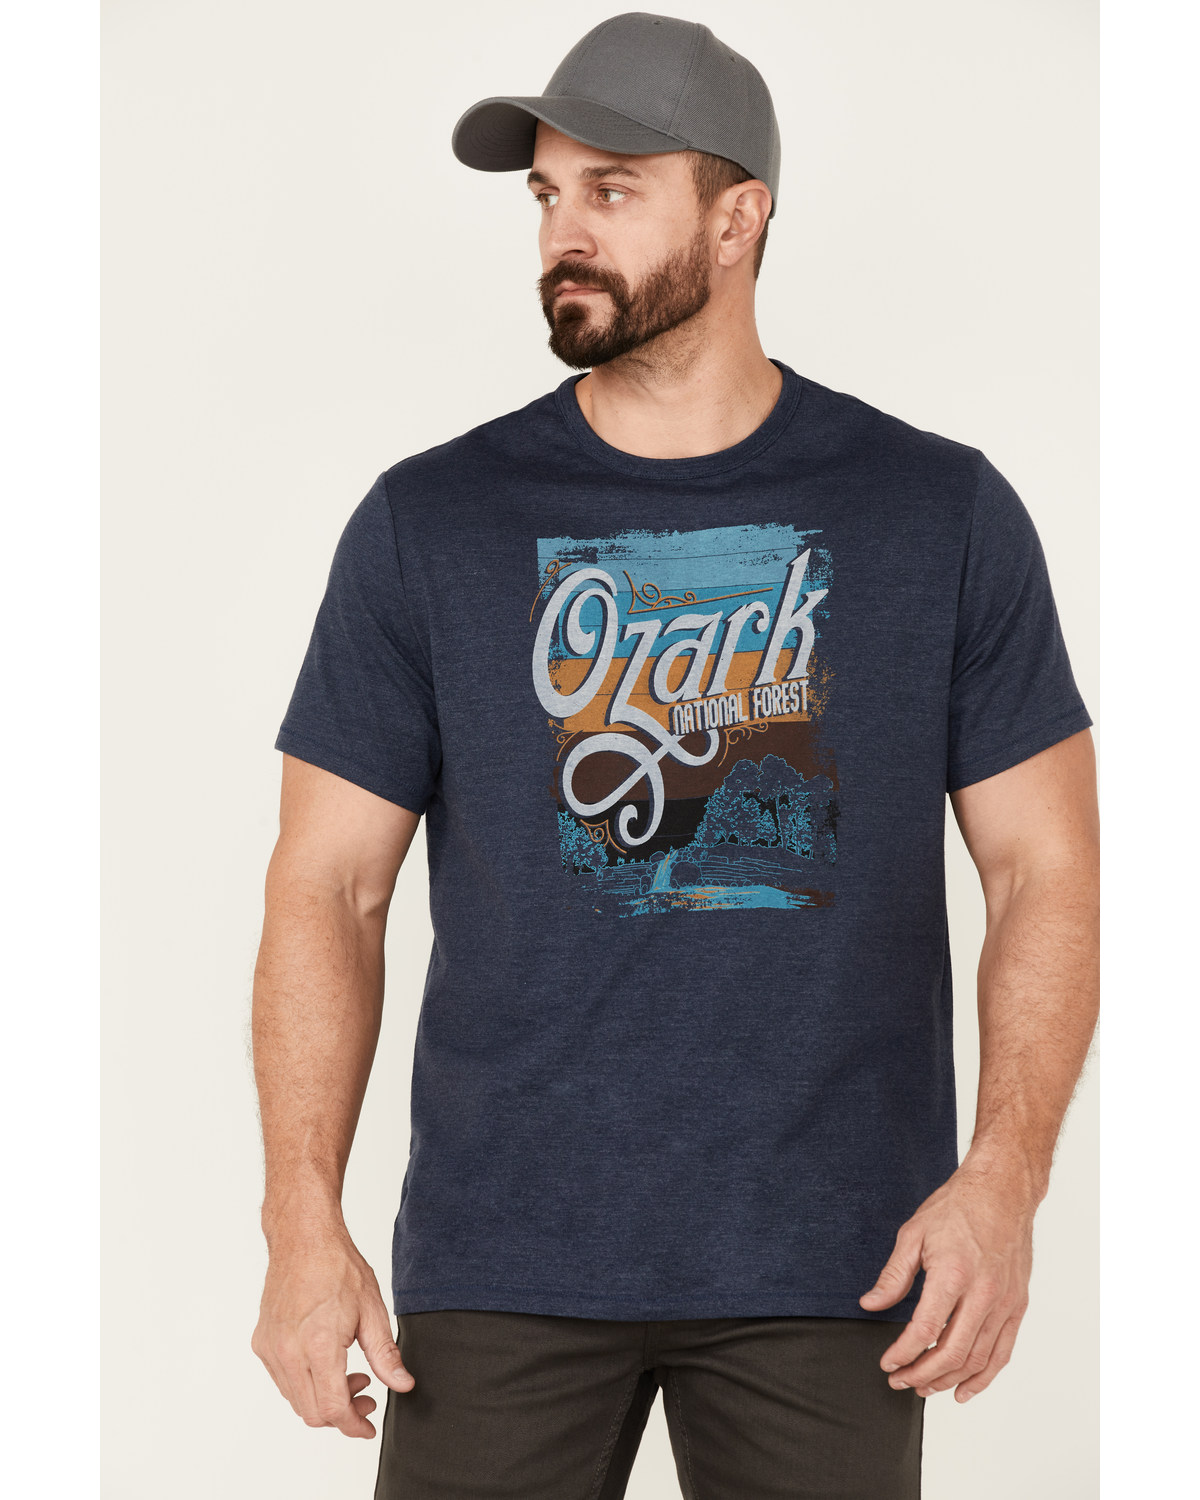 Brothers and Sons Men's Navy Ozark National Forest Graphic Short Sleeve T-Shirt